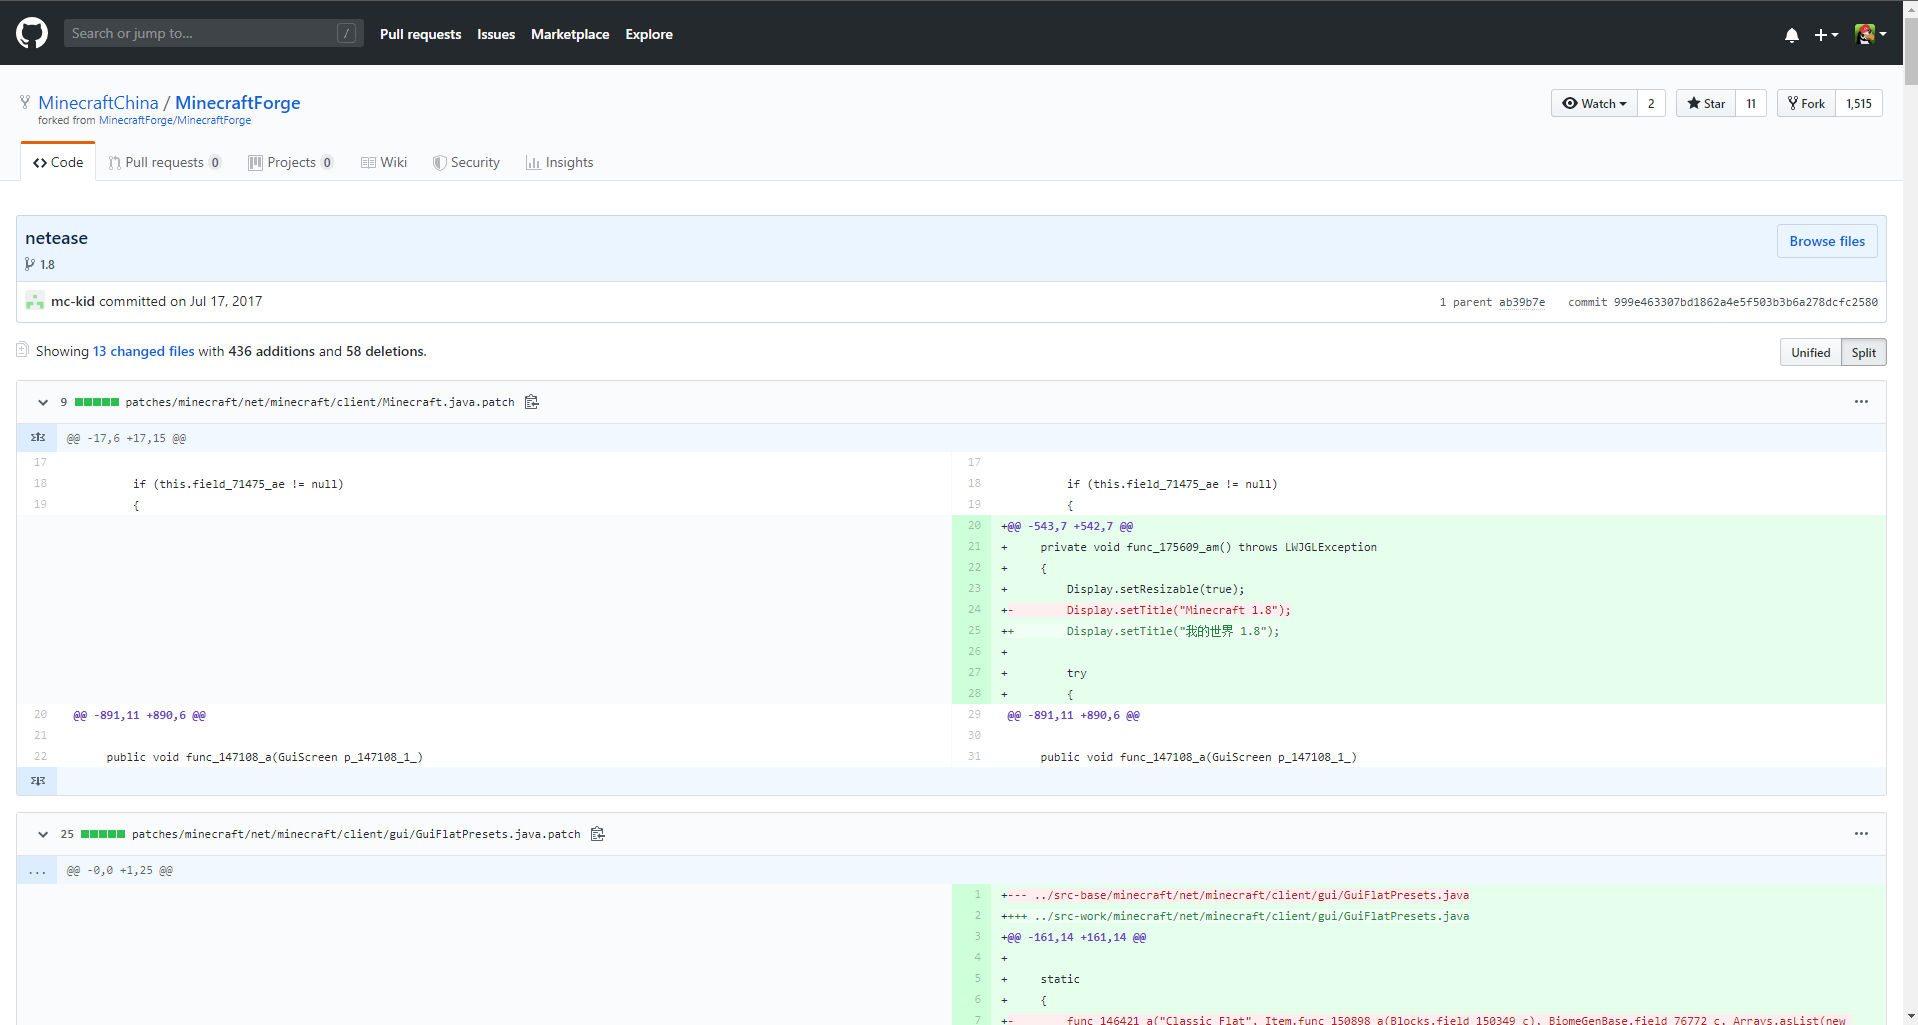 GitHub page, showing the code that NetEase modified.